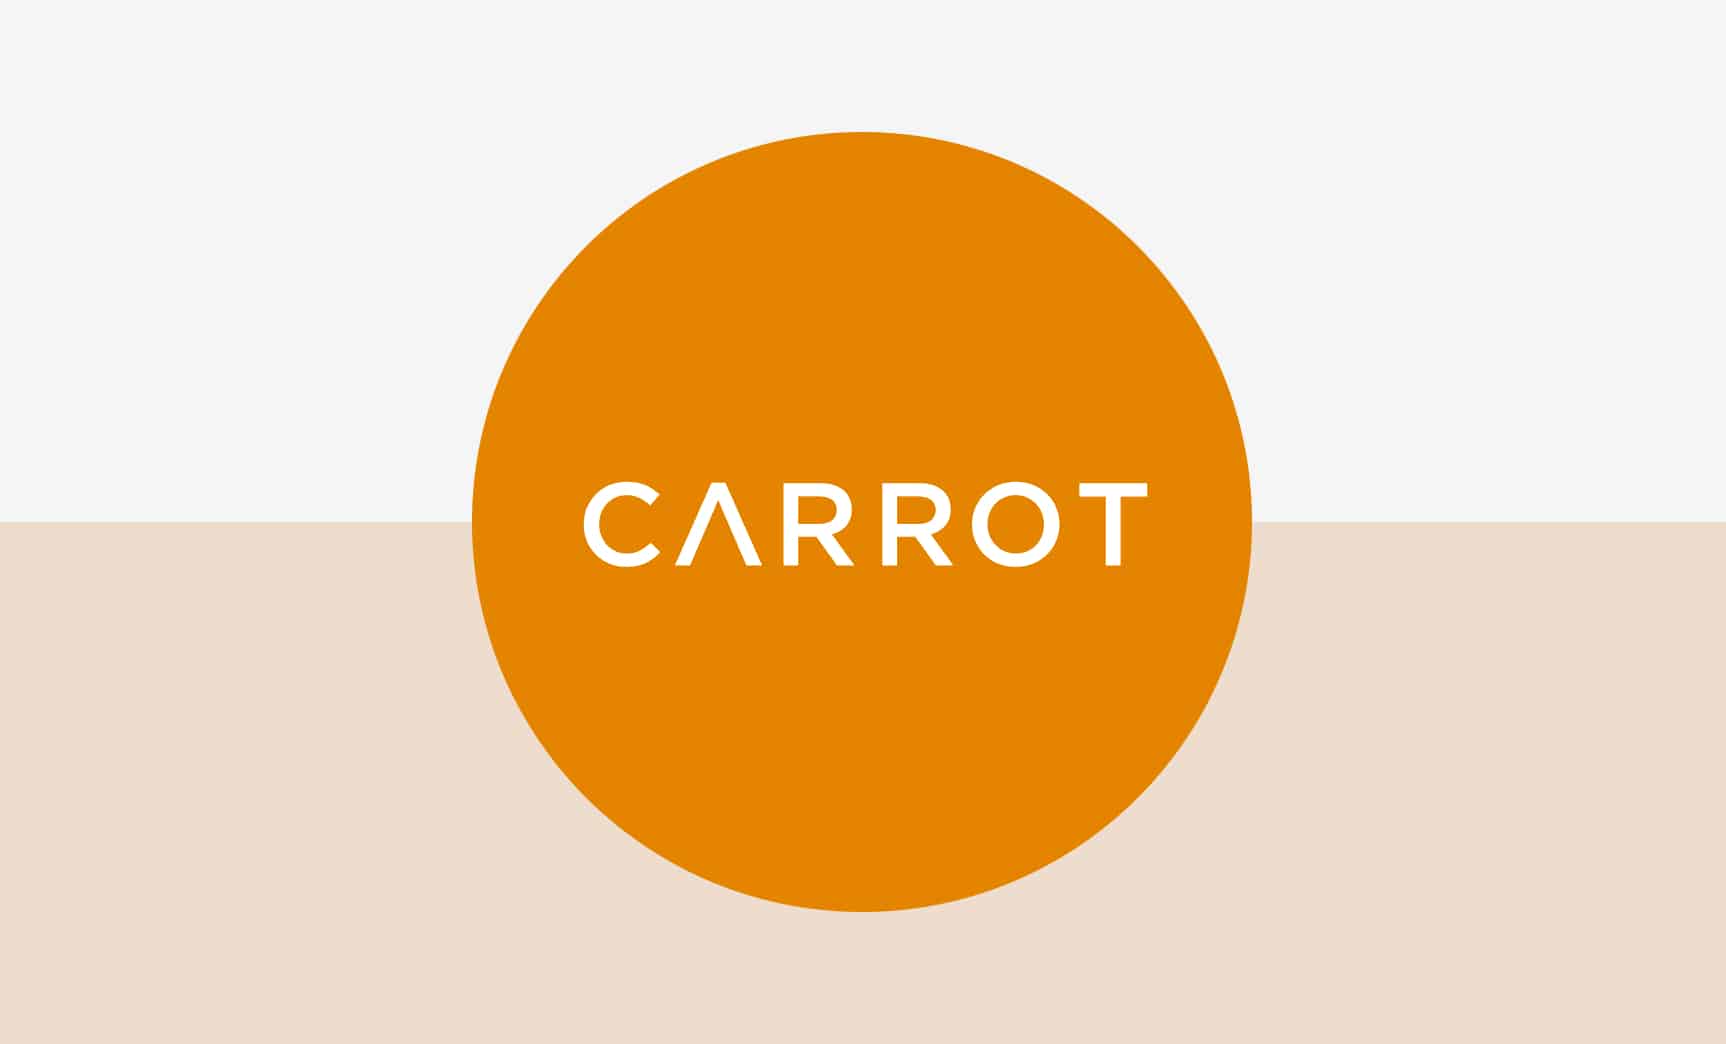 Why Fertility Benefits Provider Carrot Expanded its Gender-Affirming Care Options